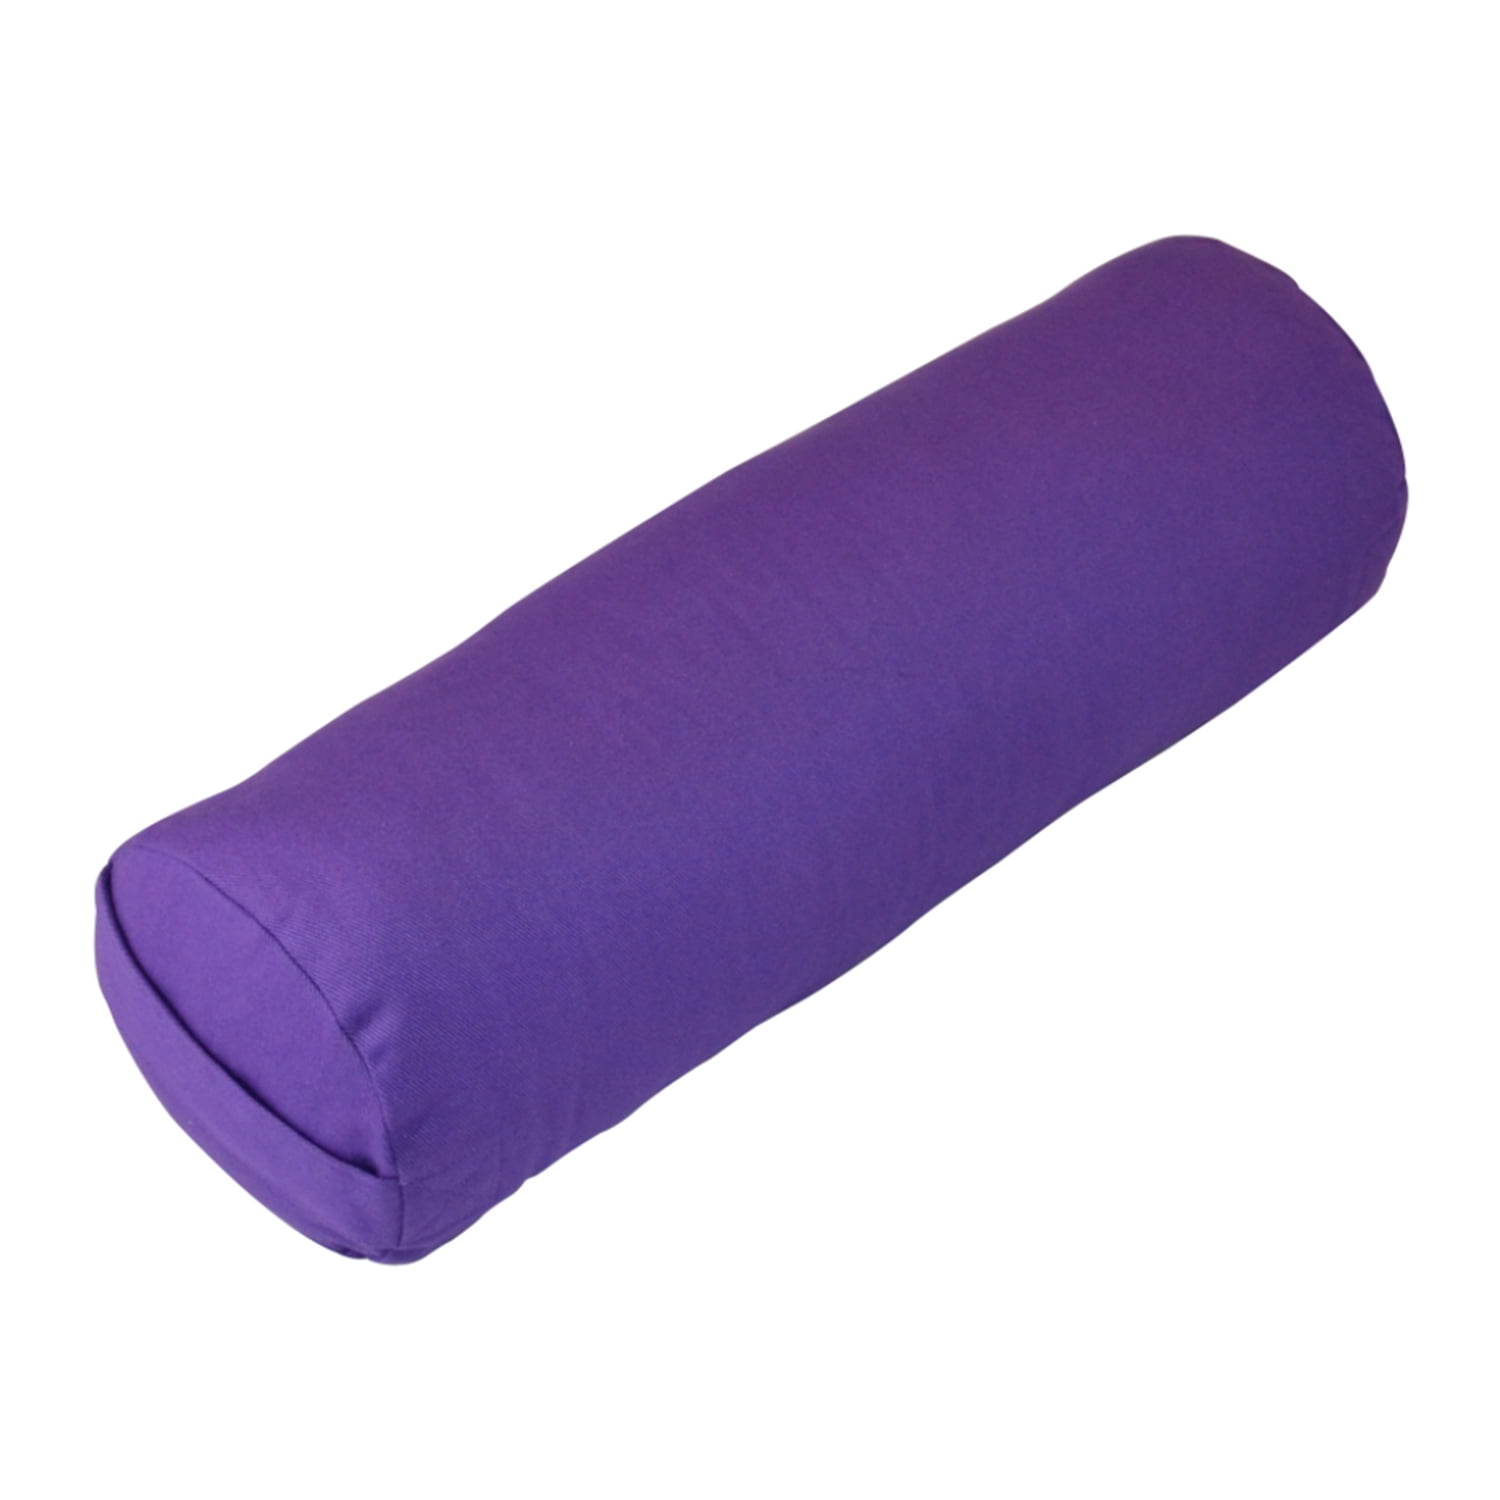 YogaAccessories Small Junior Sized Round Cotton Yoga Bolster